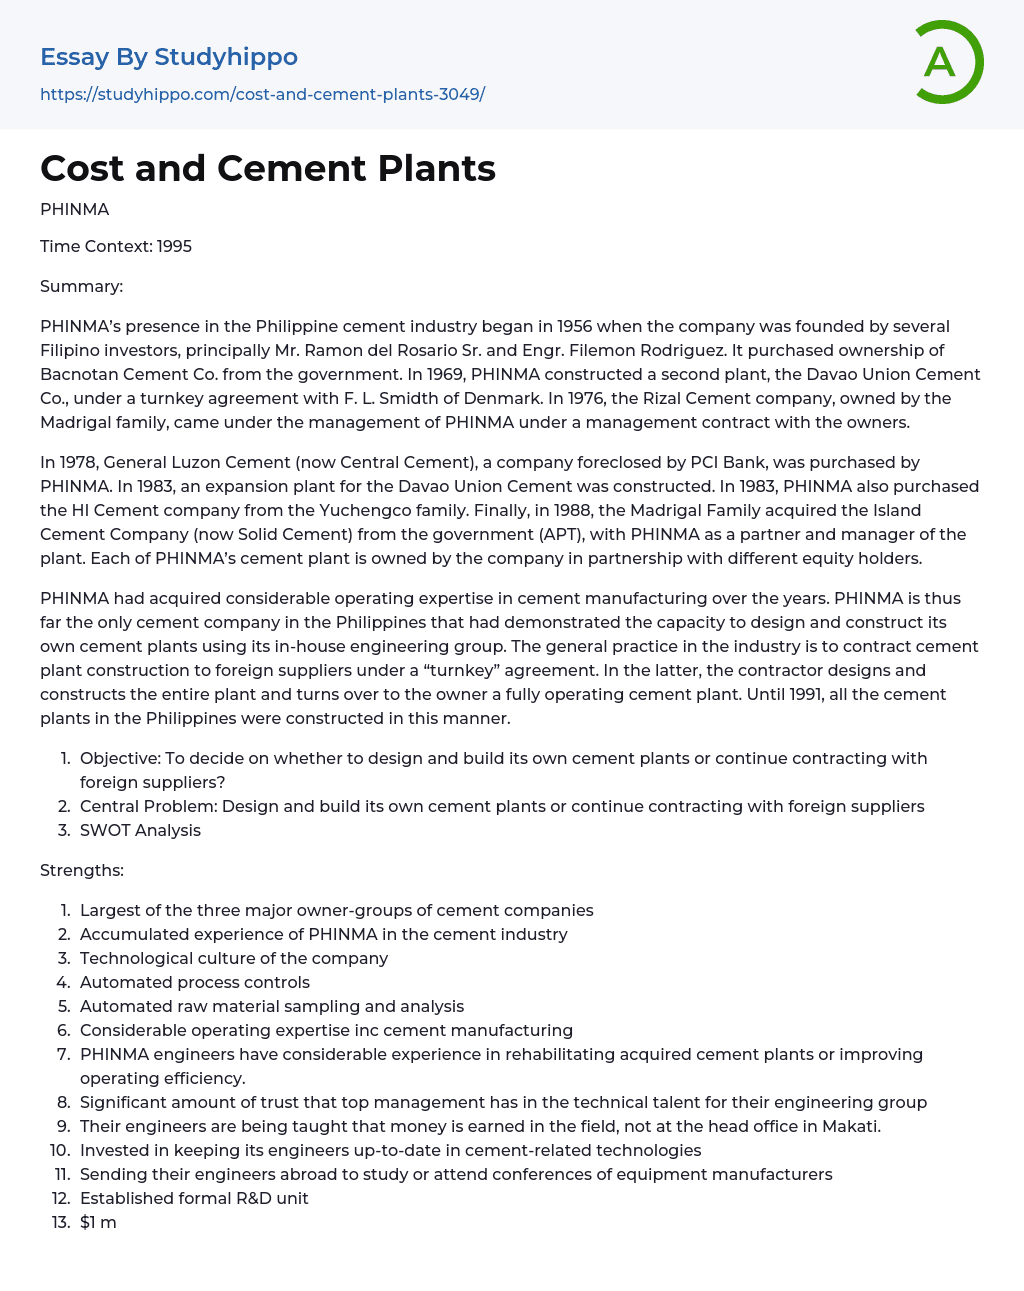 SWOT Analysis PHINMA: Cost and Cement Plants Essay Example